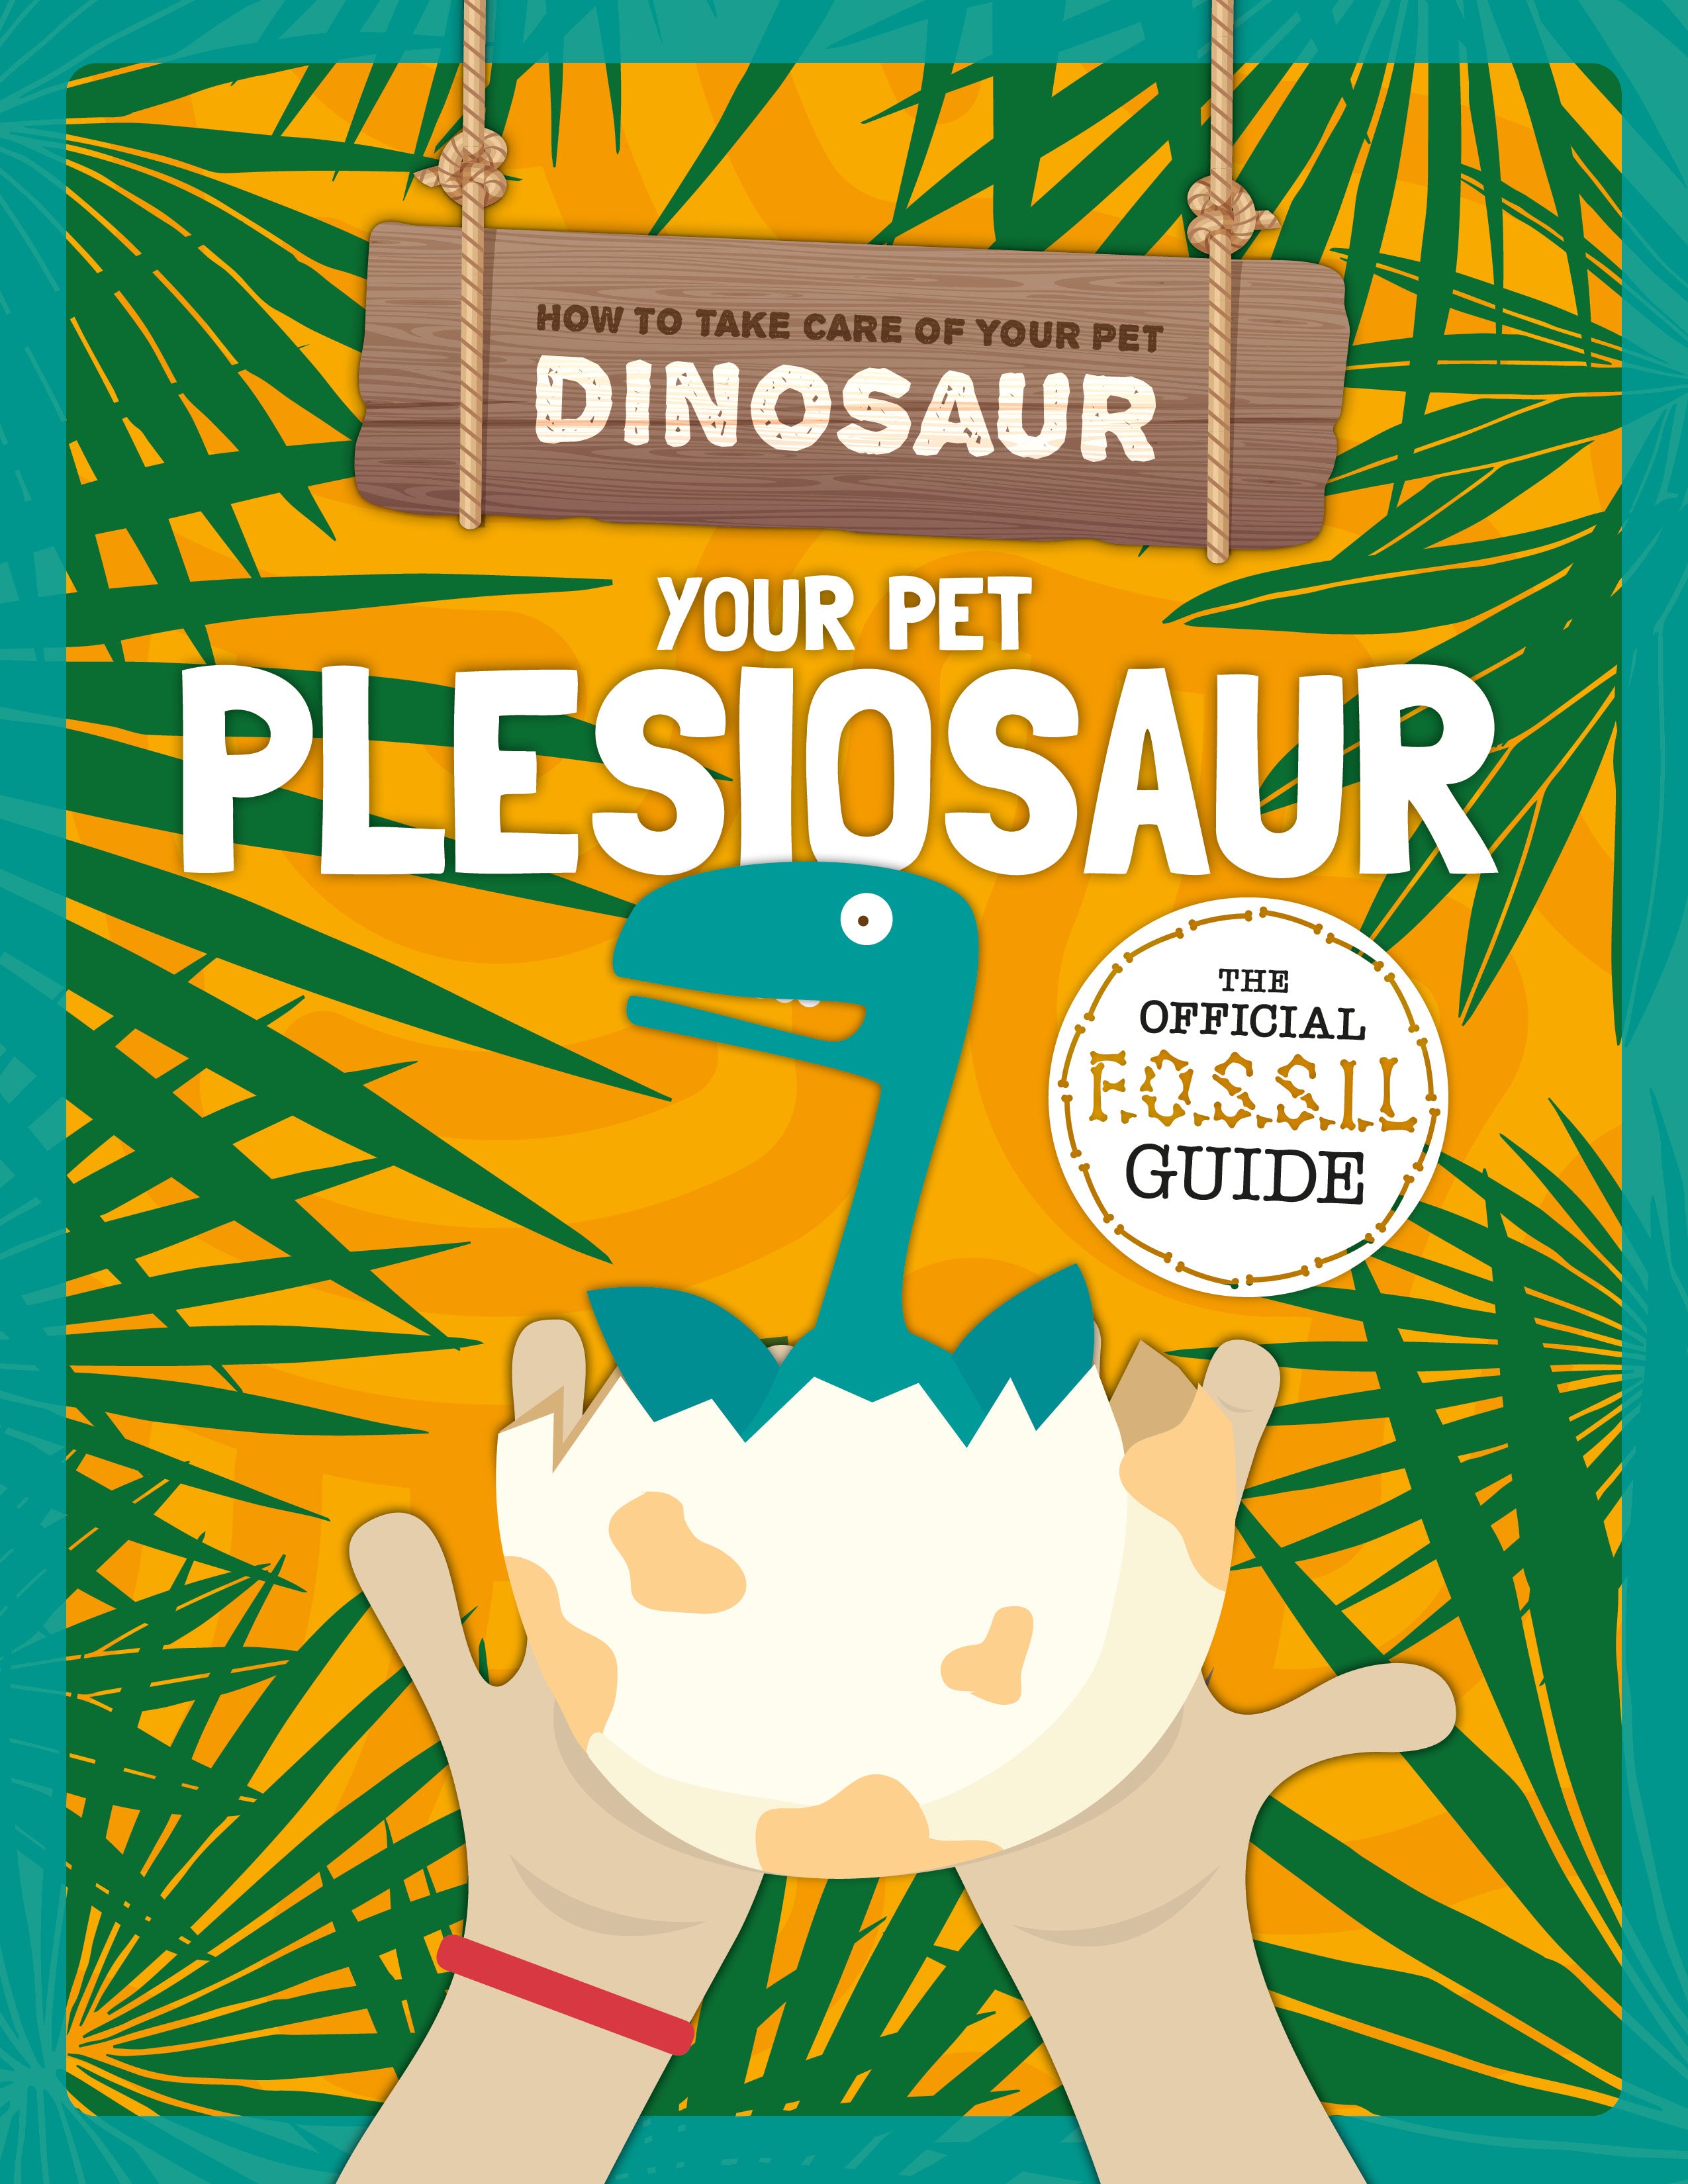 How to Take Care of Your Pet Dinosaur - Paperbacks